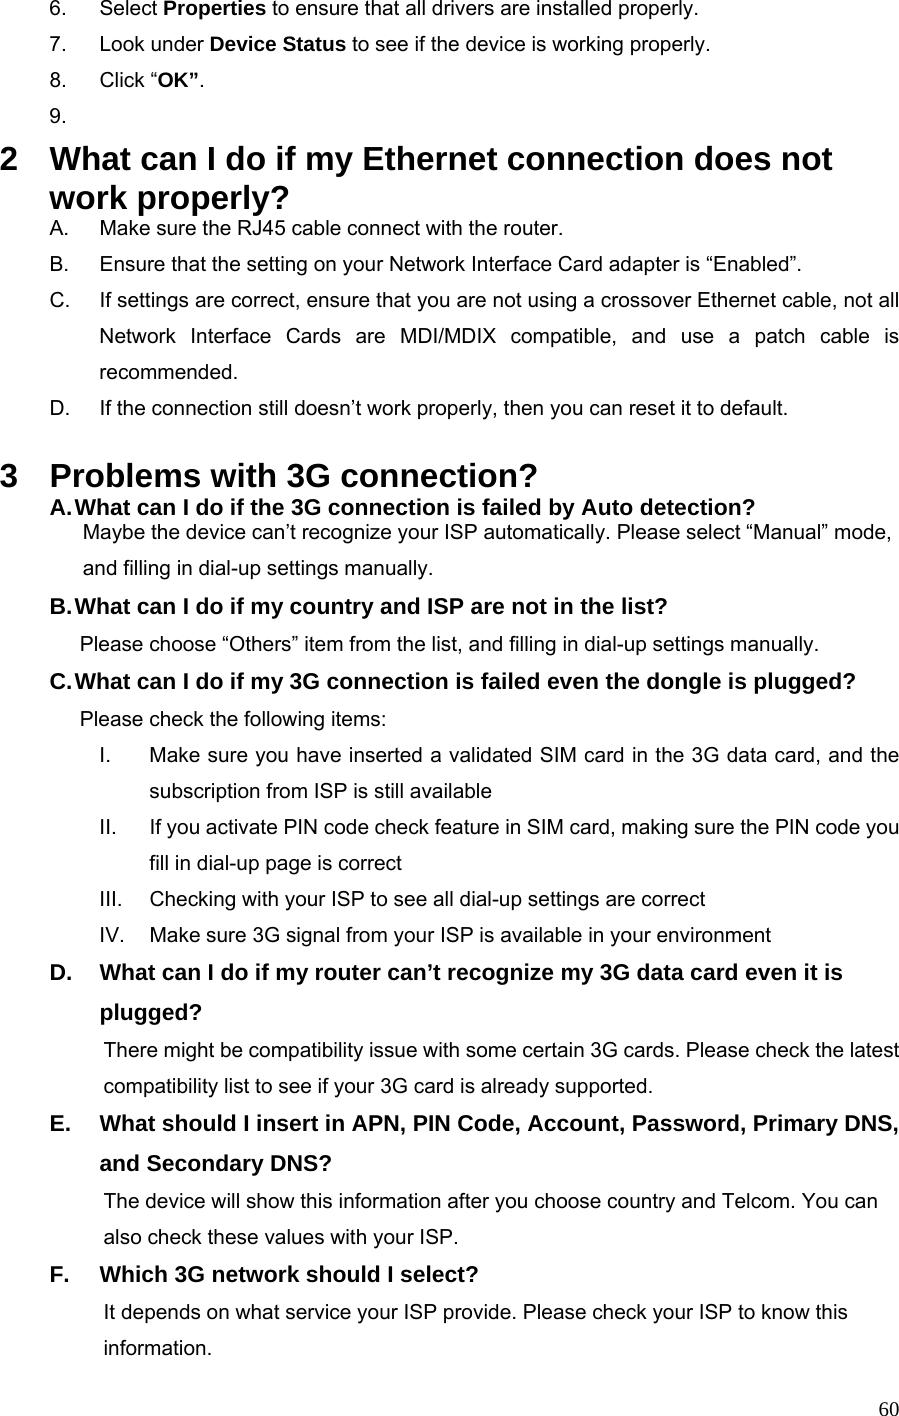  606. Select Properties to ensure that all drivers are installed properly. 7. Look under Device Status to see if the device is working properly. 8. Click “OK”. 9.  2  What can I do if my Ethernet connection does not work properly? A.  Make sure the RJ45 cable connect with the router. B.  Ensure that the setting on your Network Interface Card adapter is “Enabled”. C.  If settings are correct, ensure that you are not using a crossover Ethernet cable, not all Network Interface Cards are MDI/MDIX compatible, and use a patch cable is recommended. D.  If the connection still doesn’t work properly, then you can reset it to default.      3  Problems with 3G connection? A. What can I do if the 3G connection is failed by Auto detection?           Maybe the device can’t recognize your ISP automatically. Please select “Manual” mode,         and filling in dial-up settings manually. B. What can I do if my country and ISP are not in the list?        Please choose “Others” item from the list, and filling in dial-up settings manually. C. What can I do if my 3G connection is failed even the dongle is plugged?        Please check the following items: I.  Make sure you have inserted a validated SIM card in the 3G data card, and the subscription from ISP is still available II.  If you activate PIN code check feature in SIM card, making sure the PIN code you fill in dial-up page is correct III.  Checking with your ISP to see all dial-up settings are correct IV.  Make sure 3G signal from your ISP is available in your environment D.  What can I do if my router can’t recognize my 3G data card even it is plugged?           There might be compatibility issue with some certain 3G cards. Please check the latest     compatibility list to see if your 3G card is already supported. E.  What should I insert in APN, PIN Code, Account, Password, Primary DNS, and Secondary DNS?                     The device will show this information after you choose country and Telcom. You can       also check these values with your ISP. F.  Which 3G network should I select?           It depends on what service your ISP provide. Please check your ISP to know this information. 